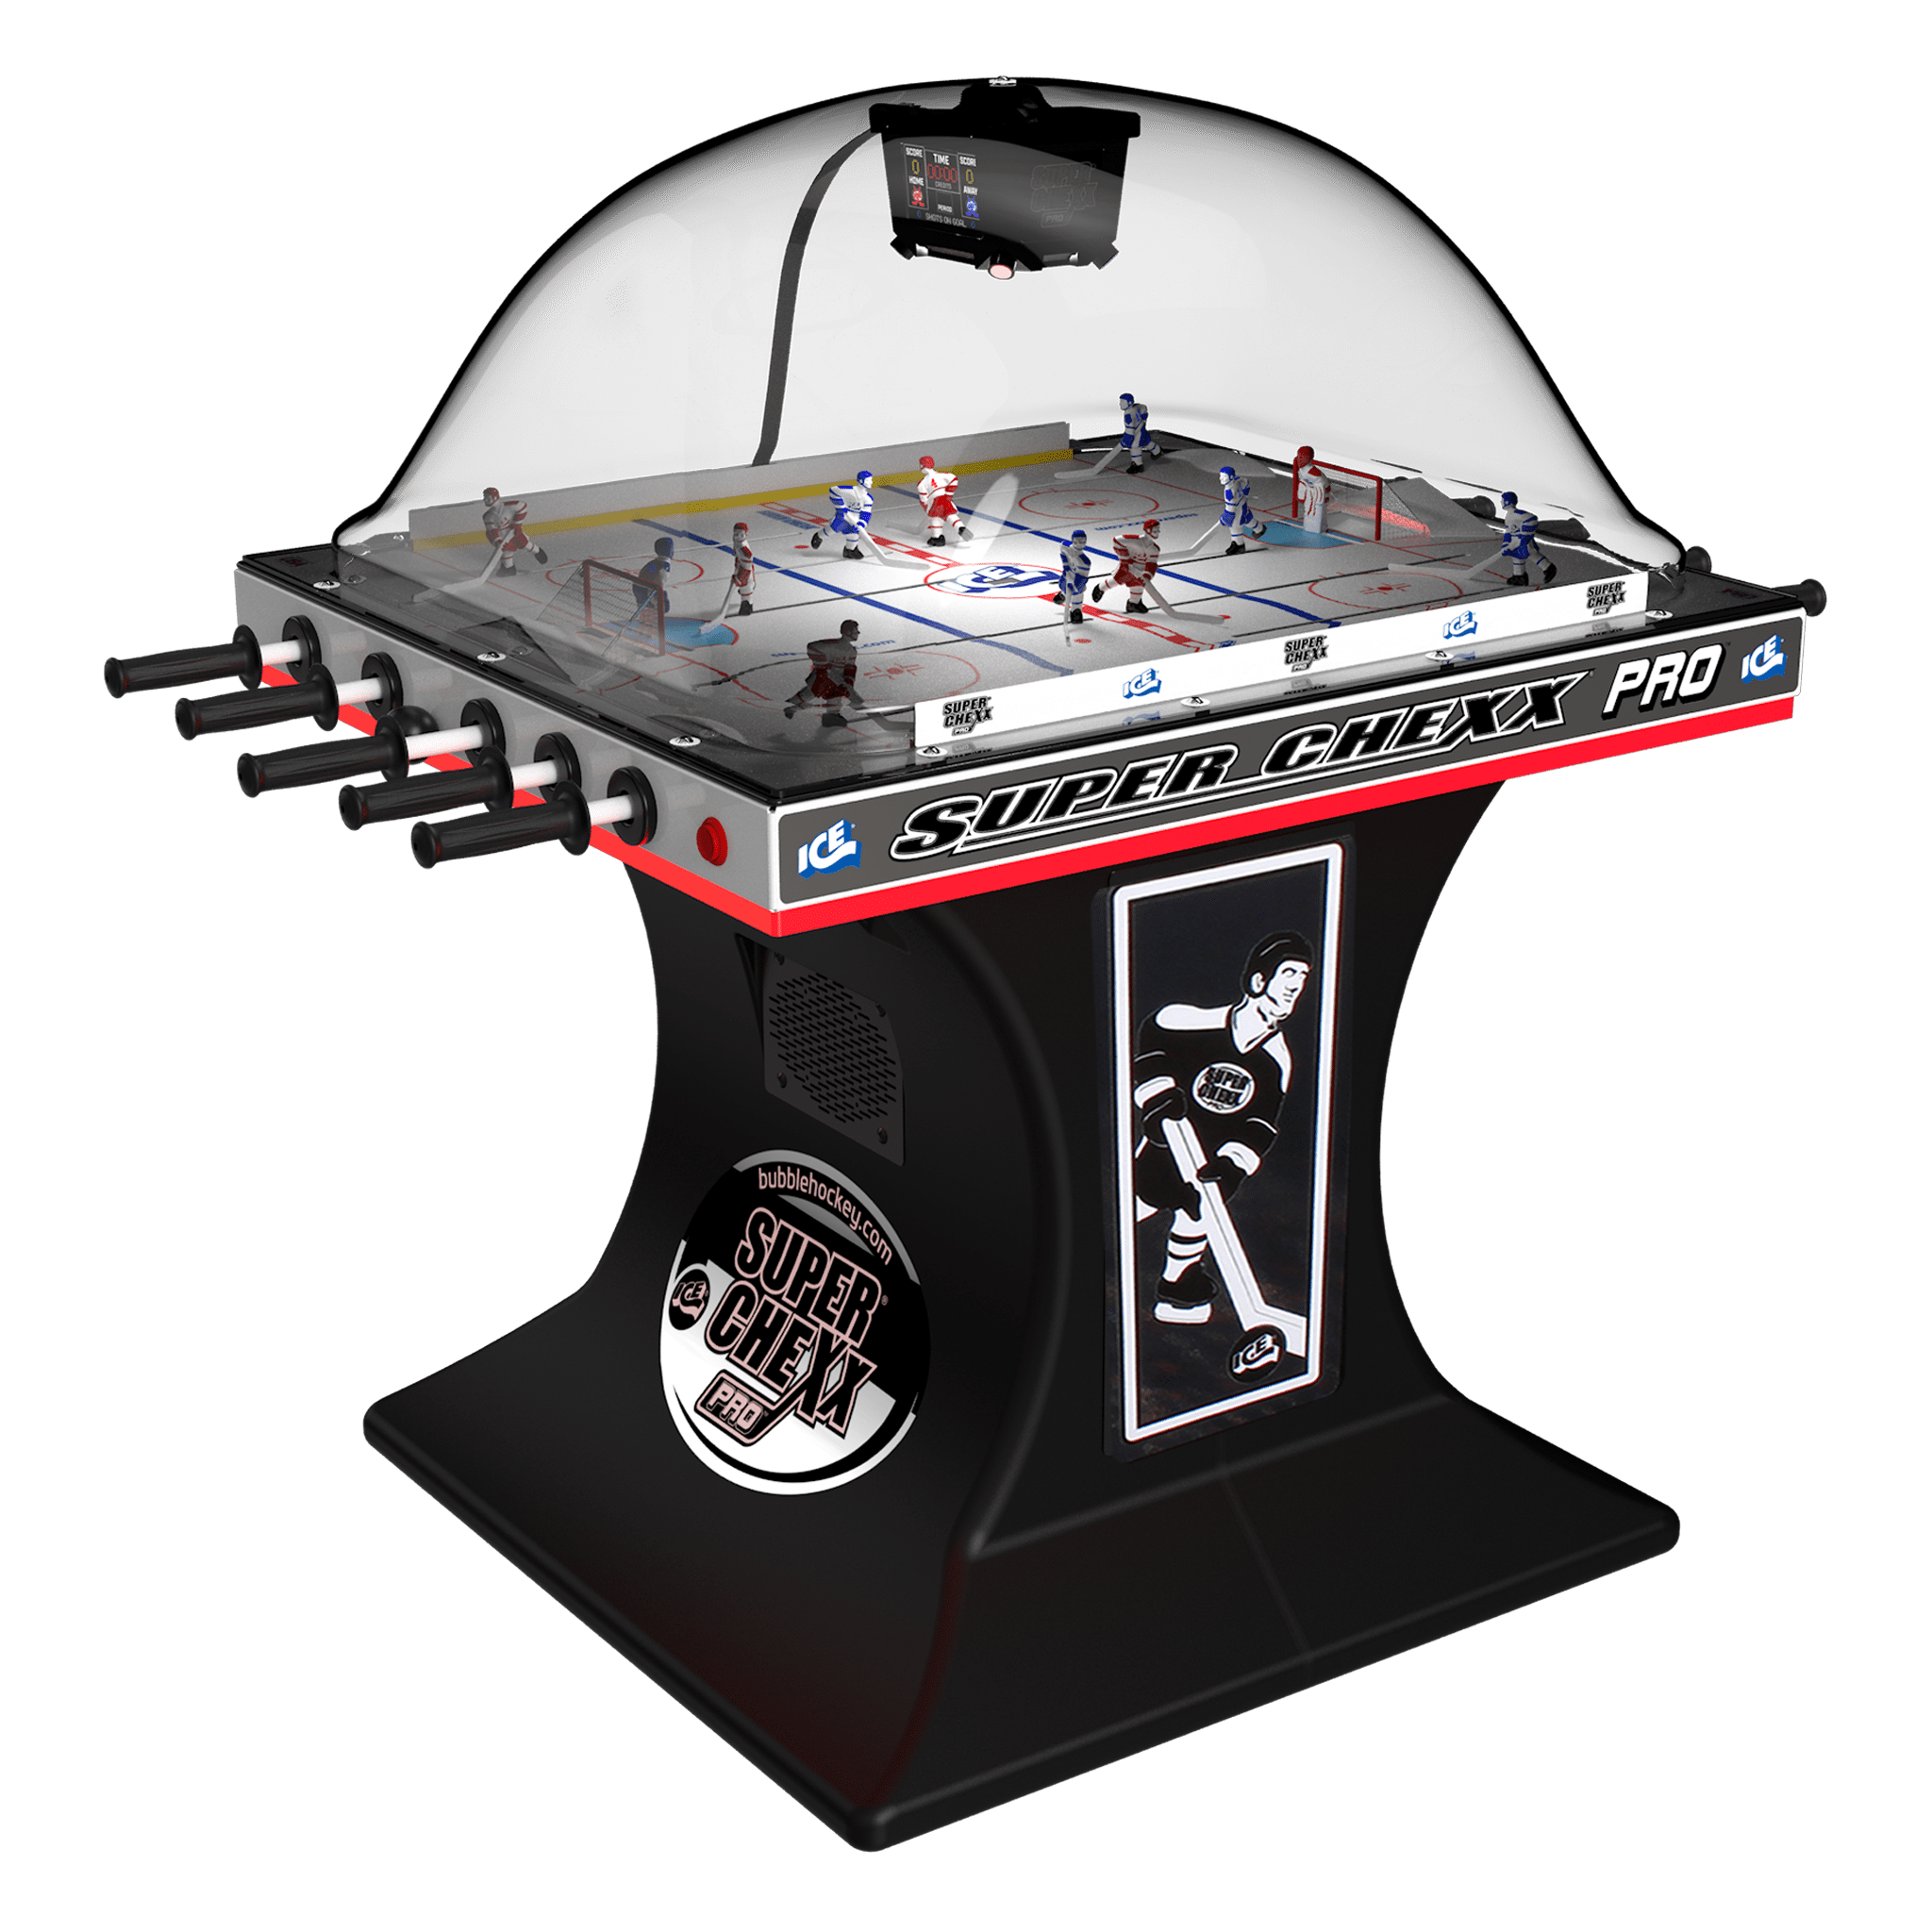 Super Chexx Pro Bubble Hockey with Black Base and LED add-ons - In Stock